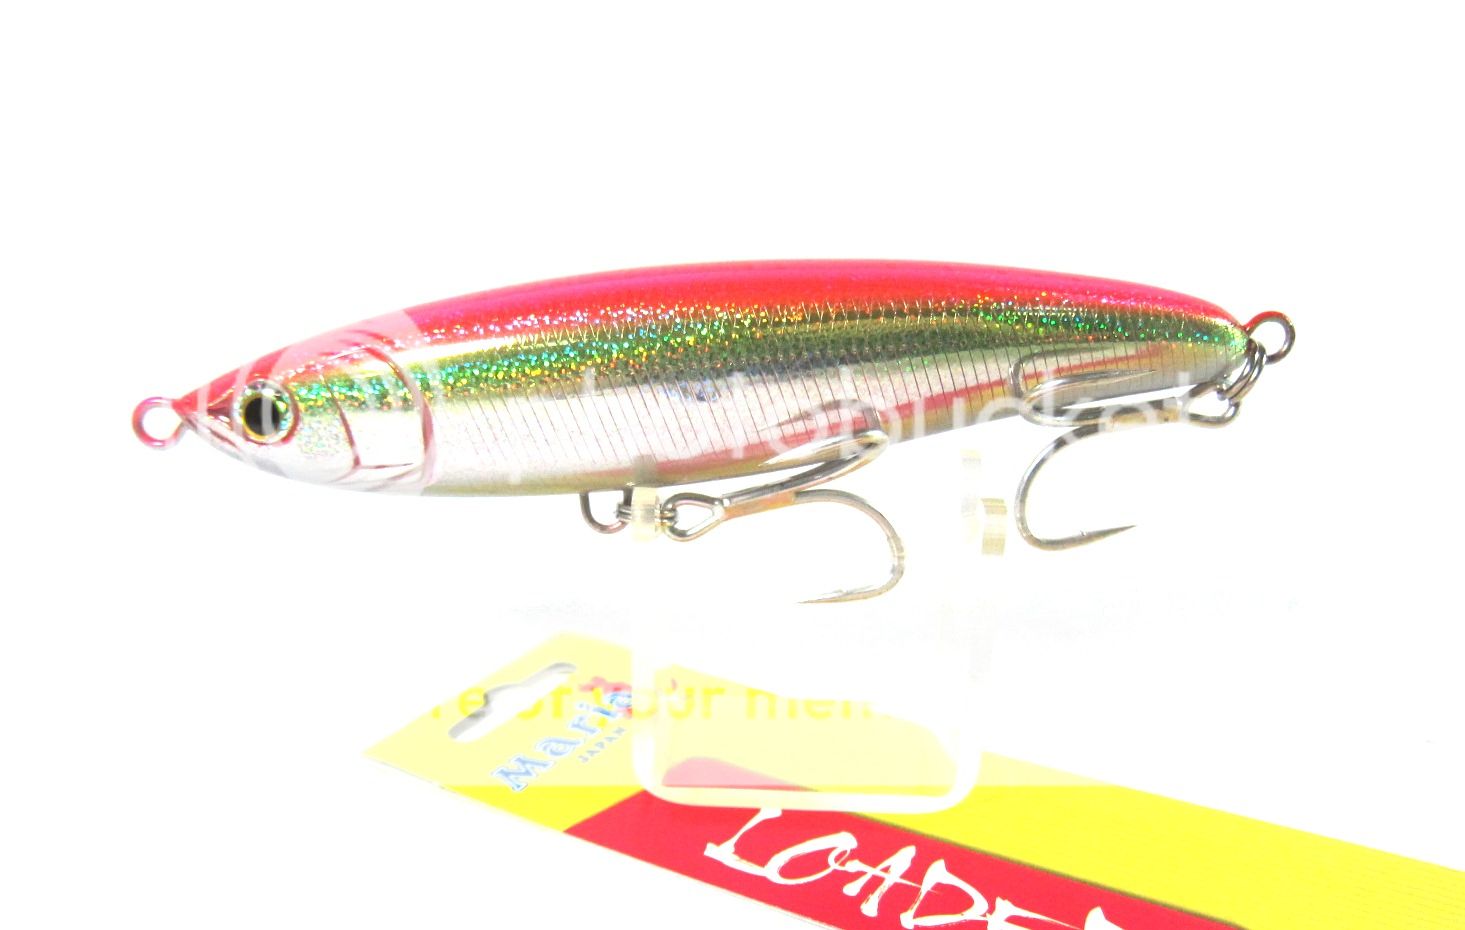 pencil sinking lure s140 plh maker maria model loaded saltwater pencil